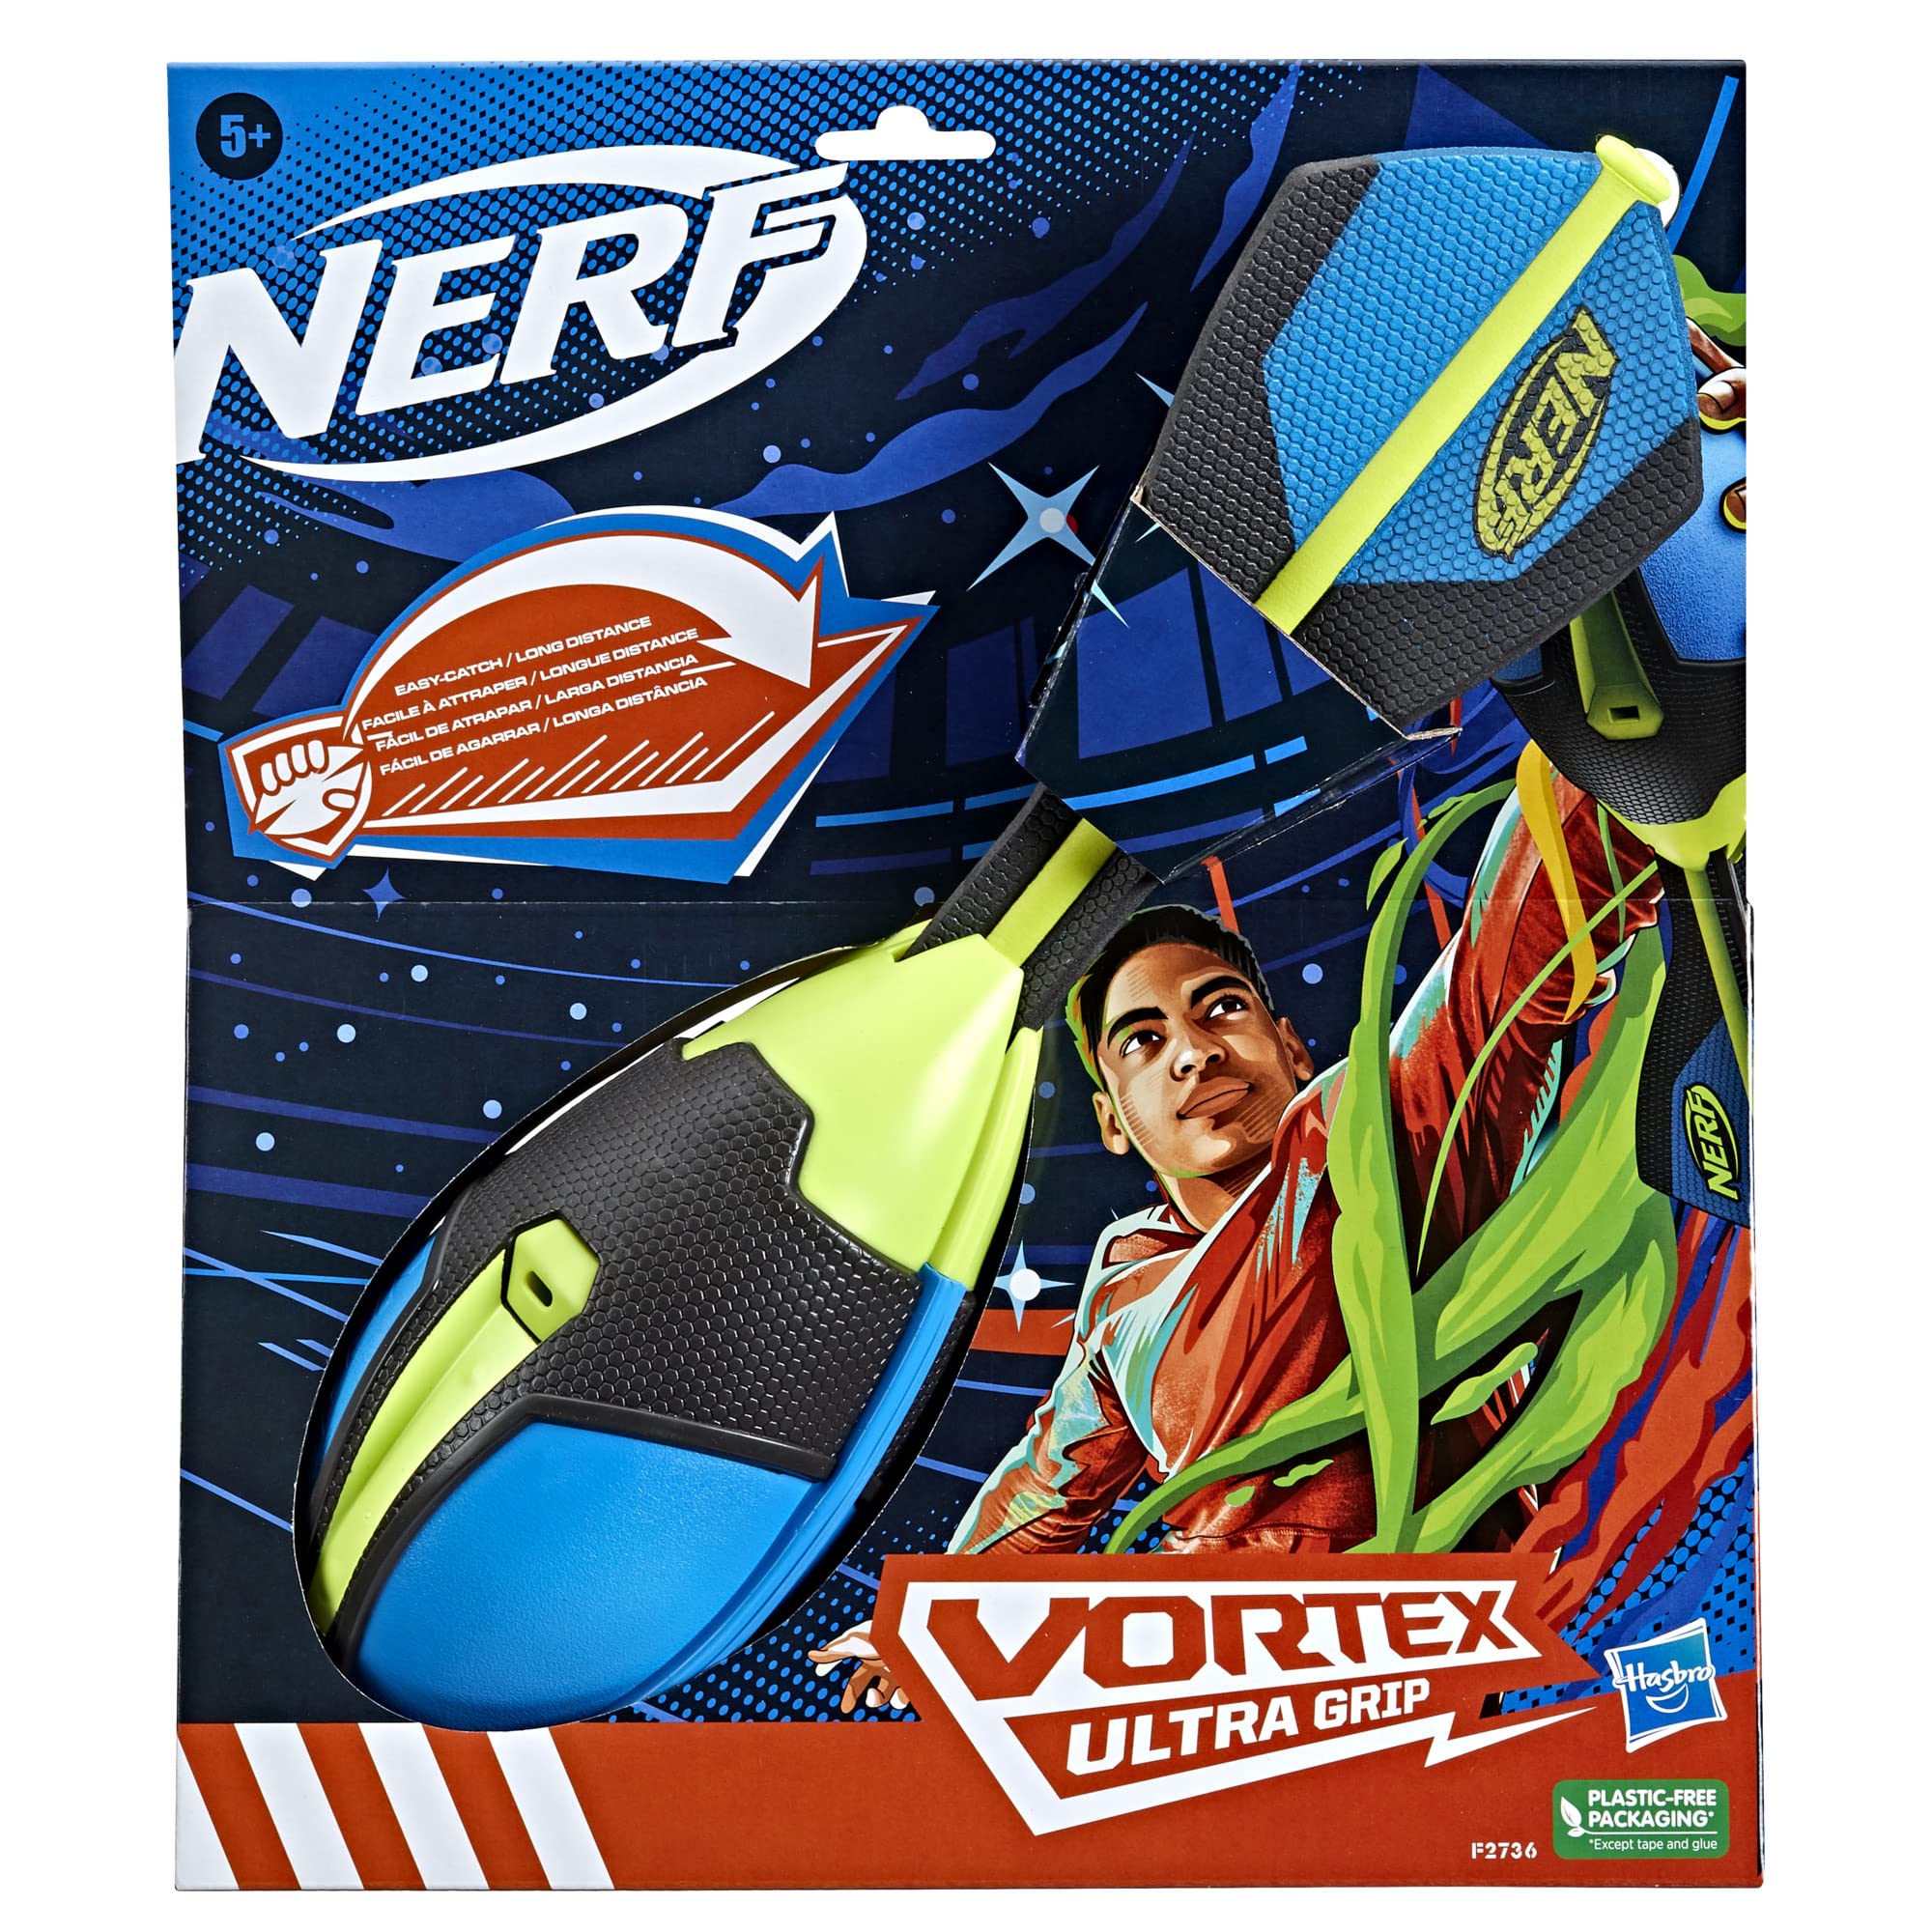 NERF Vortex Ultra Grip Football, Designed for Easy Catching, Howling Whistle Sound, Distance-Optimizing Tail, Water-Resistant, All-Weather Play